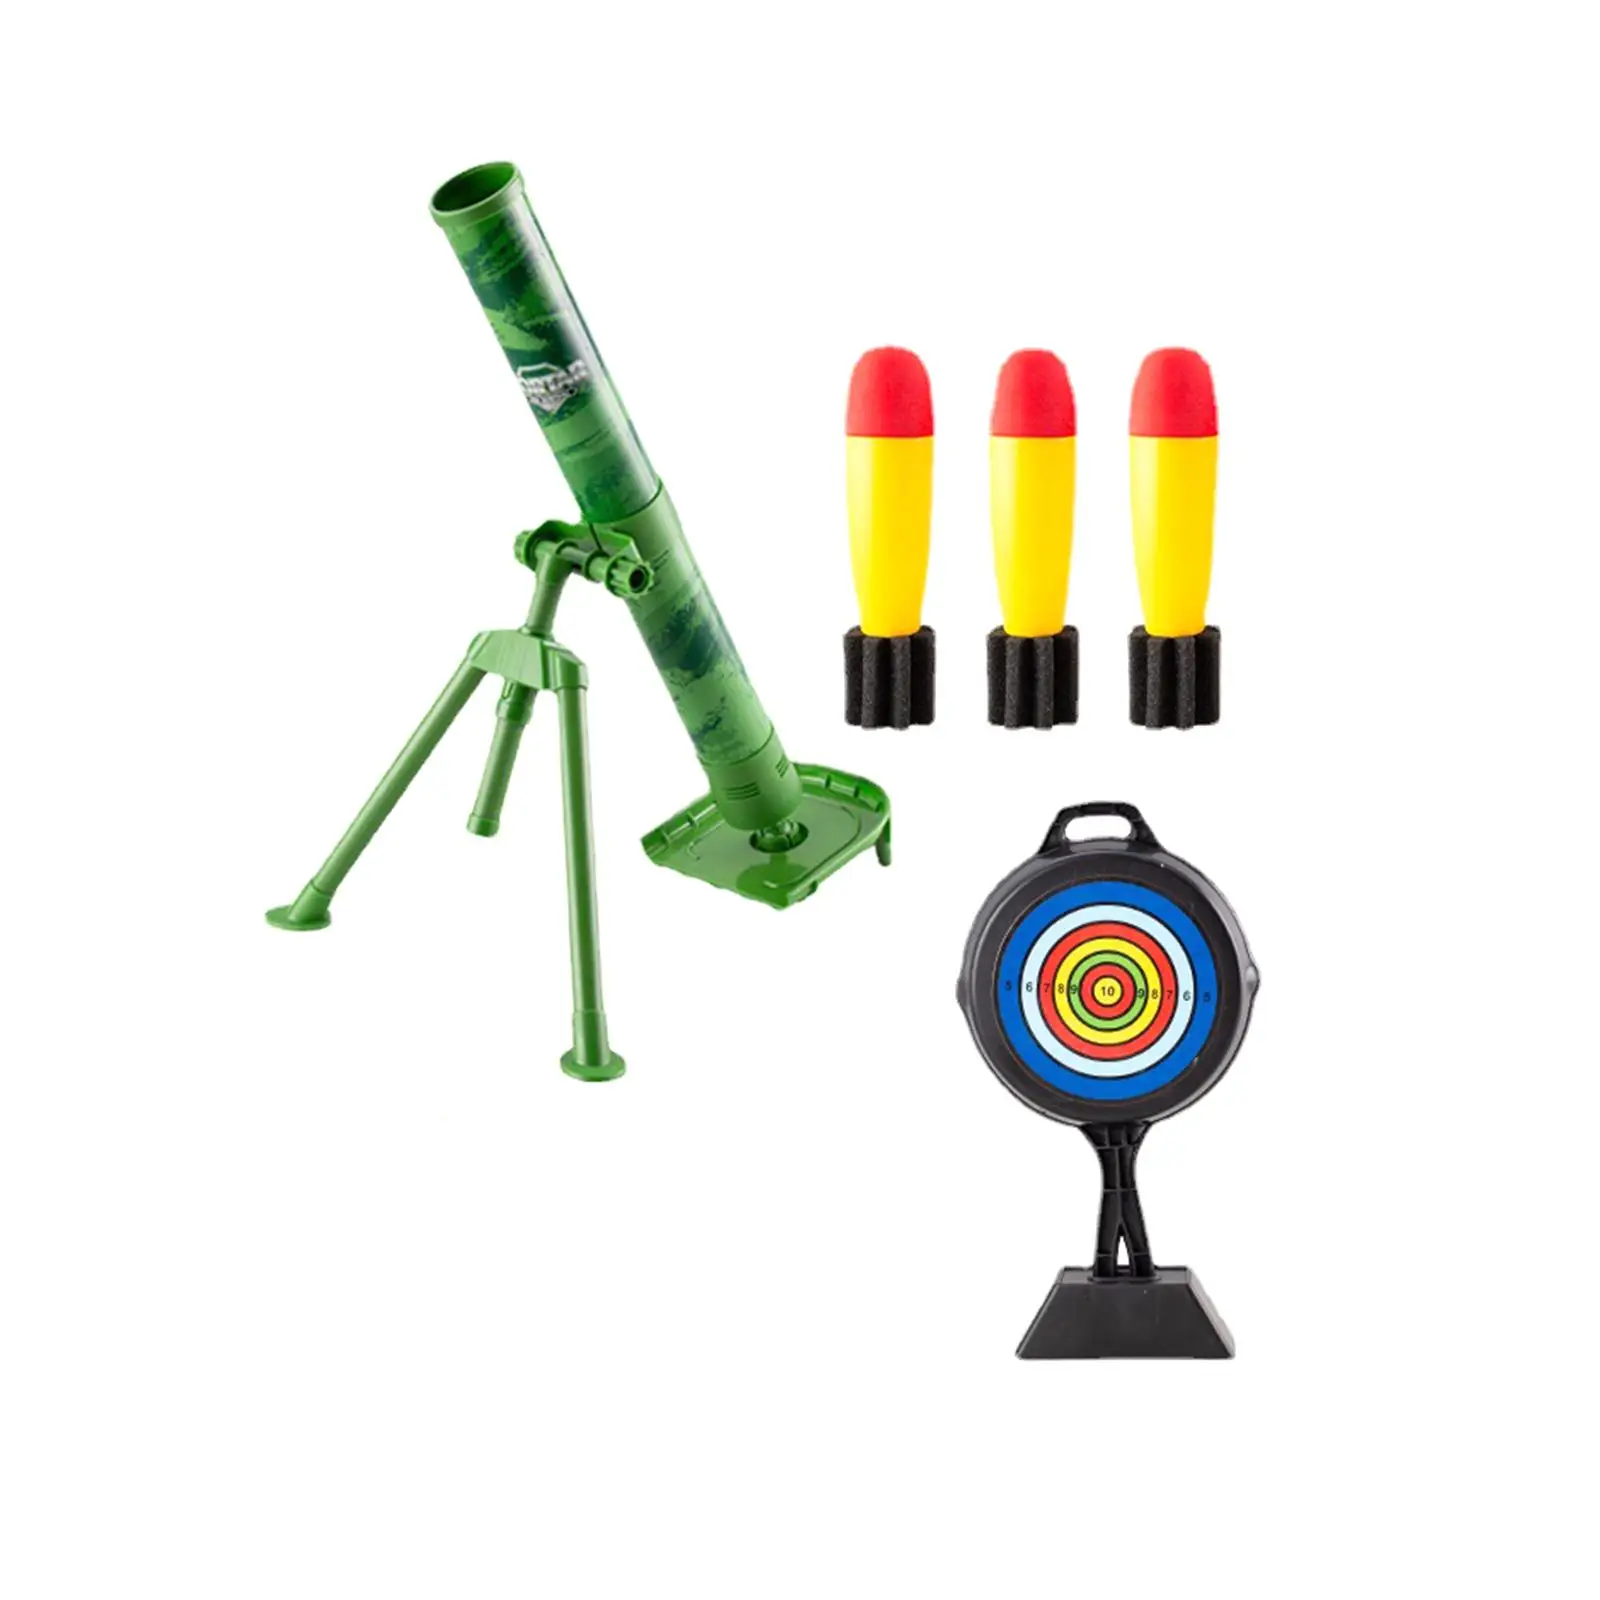 Mortar Launcher Toy Set with Sound Professional Launch Set Rocket Launcher Set Game for Boys and Girls Festival Gifts